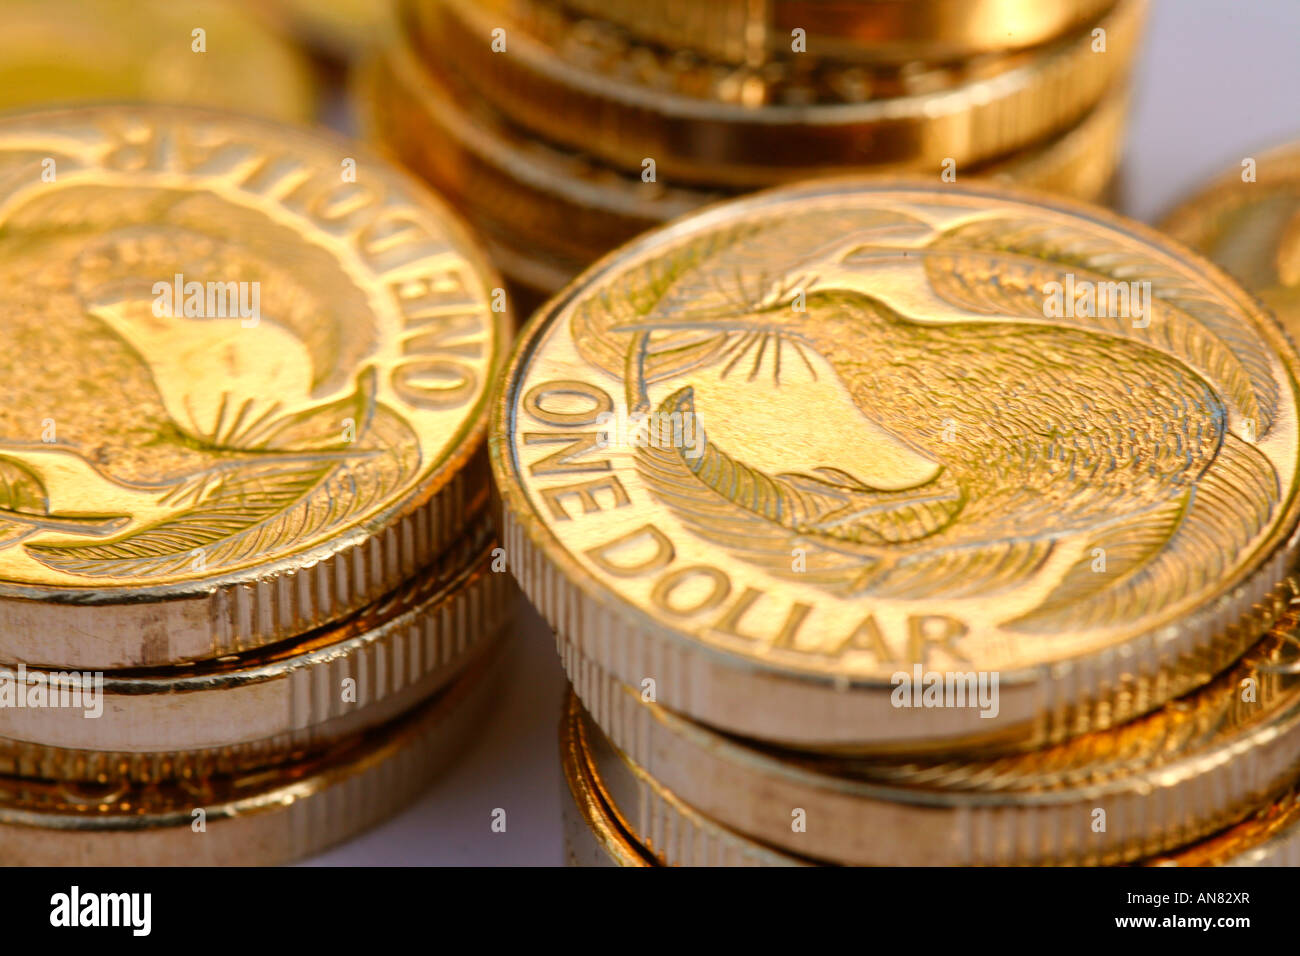 stacks on New Zealand $1 gold coins Stock Photo: 15442654 ...